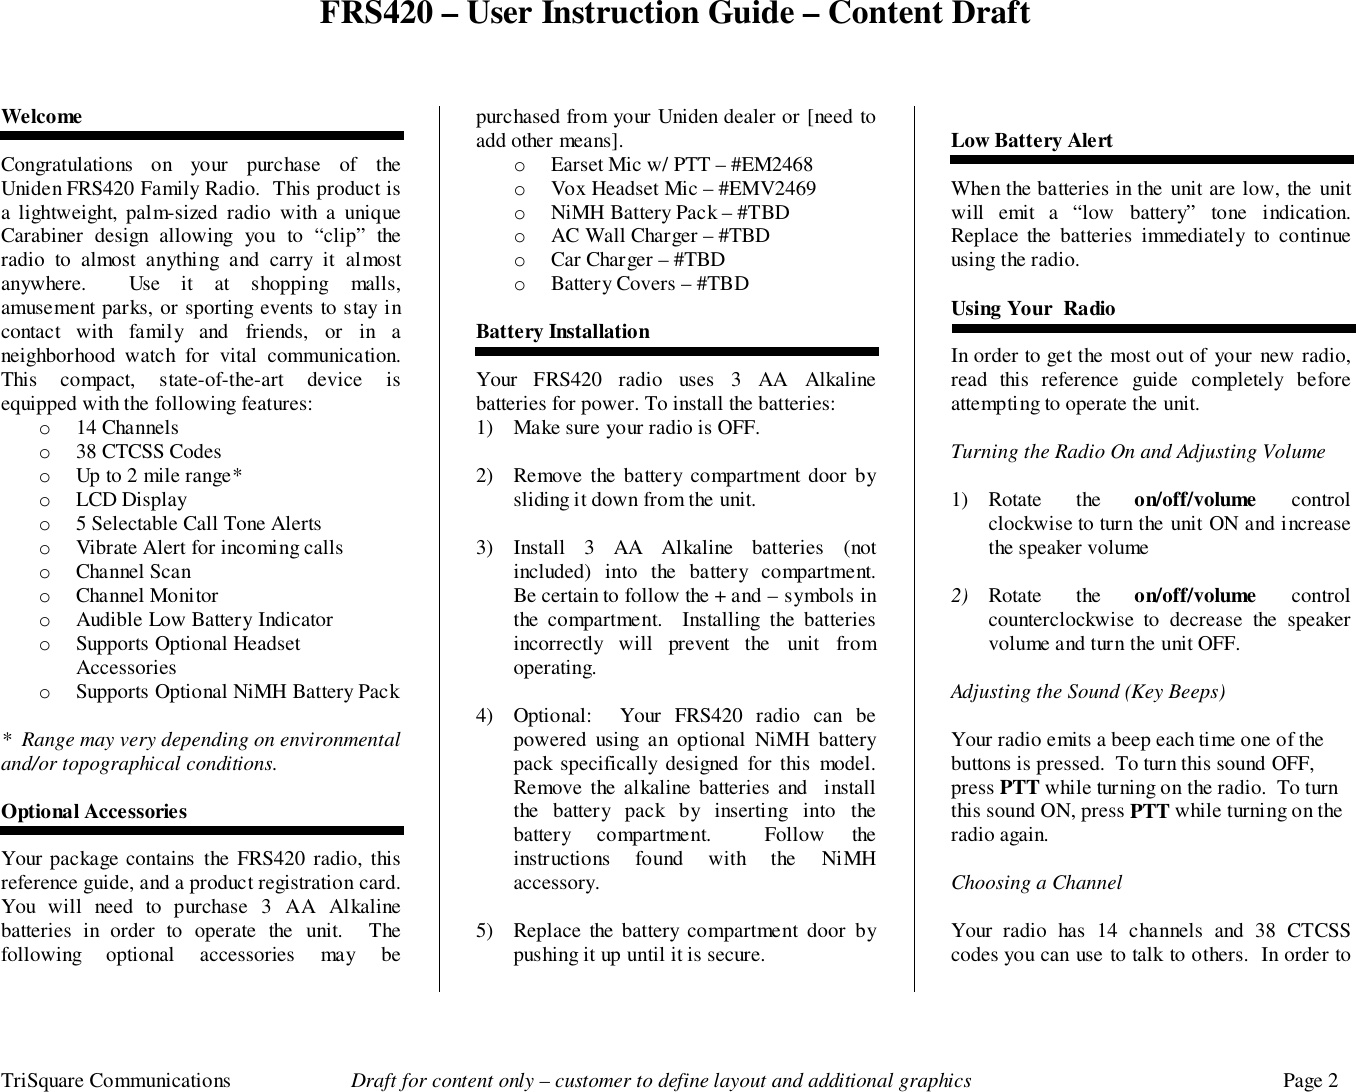 FRS420 – User Instruction Guide – Content DraftTriSquare Communications Draft for content only – customer to define layout and additional graphics Page 2WelcomeCongratulations on your purchase of theUniden FRS420 Family Radio.  This product isa lightweight, palm-sized radio with a uniqueCarabiner design allowing you to “clip” theradio to almost anything and carry it almostanywhere.  Use it at shopping malls,amusement parks, or sporting events to stay incontact with family and friends, or in aneighborhood watch for vital communication.This compact, state-of-the-art device isequipped with the following features:o 14 Channelso 38 CTCSS Codeso Up to 2 mile range*o LCD Displayo 5 Selectable Call Tone Alertso Vibrate Alert for incoming callso Channel Scano Channel Monitoro Audible Low Battery Indicatoro Supports Optional HeadsetAccessorieso Supports Optional NiMH Battery Pack*  Range may very depending on environmentaland/or topographical conditions.Optional AccessoriesYour package contains the FRS420 radio, thisreference guide, and a product registration card.You will need to purchase 3 AA Alkalinebatteries in order to operate the unit.  Thefollowing optional accessories may bepurchased from your Uniden dealer or [need toadd other means].o Earset Mic w/ PTT – #EM2468o Vox Headset Mic – #EMV2469o NiMH Battery Pack – #TBDo AC Wall Charger – #TBDo Car Charger – #TBDo Battery Covers – #TBDBattery InstallationYour FRS420 radio uses 3 AA Alkalinebatteries for power. To install the batteries:1) Make sure your radio is OFF.2) Remove the battery compartment door bysliding it down from the unit.3) Install 3 AA Alkaline batteries (notincluded) into the battery compartment.Be certain to follow the + and – symbols inthe compartment.  Installing the batteriesincorrectly will prevent the unit fromoperating.4) Optional:  Your FRS420 radio can bepowered using an optional NiMH batterypack specifically designed for this model.Remove the alkaline batteries and  installthe battery pack by inserting into thebattery compartment.  Follow theinstructions found with the NiMHaccessory.5) Replace the battery compartment door bypushing it up until it is secure.Low Battery AlertWhen the batteries in the unit are low, the unitwill emit a “low battery” tone indication.Replace the batteries immediately to continueusing the radio.Using Your  RadioIn order to get the most out of your new radio,read this reference guide completely beforeattempting to operate the unit.Turning the Radio On and Adjusting Volume1) Rotate the on/off/volume controlclockwise to turn the unit ON and increasethe speaker volume2) Rotate the on/off/volume controlcounterclockwise to decrease the speakervolume and turn the unit OFF.Adjusting the Sound (Key Beeps)Your radio emits a beep each time one of thebuttons is pressed.  To turn this sound OFF,press PTT while turning on the radio.  To turnthis sound ON, press PTT while turning on theradio again.Choosing a ChannelYour radio has 14 channels and 38 CTCSScodes you can use to talk to others.  In order to